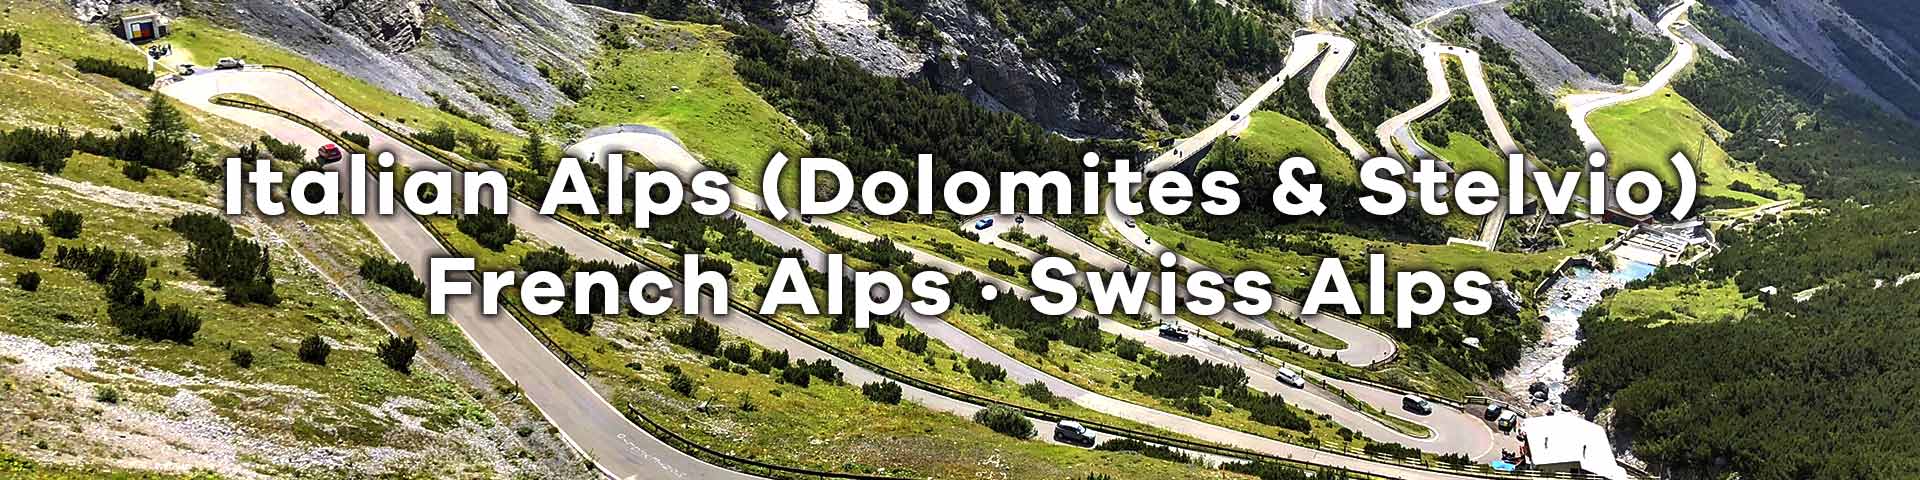 The switchbacks of Passo Fedaia in the Dolomites